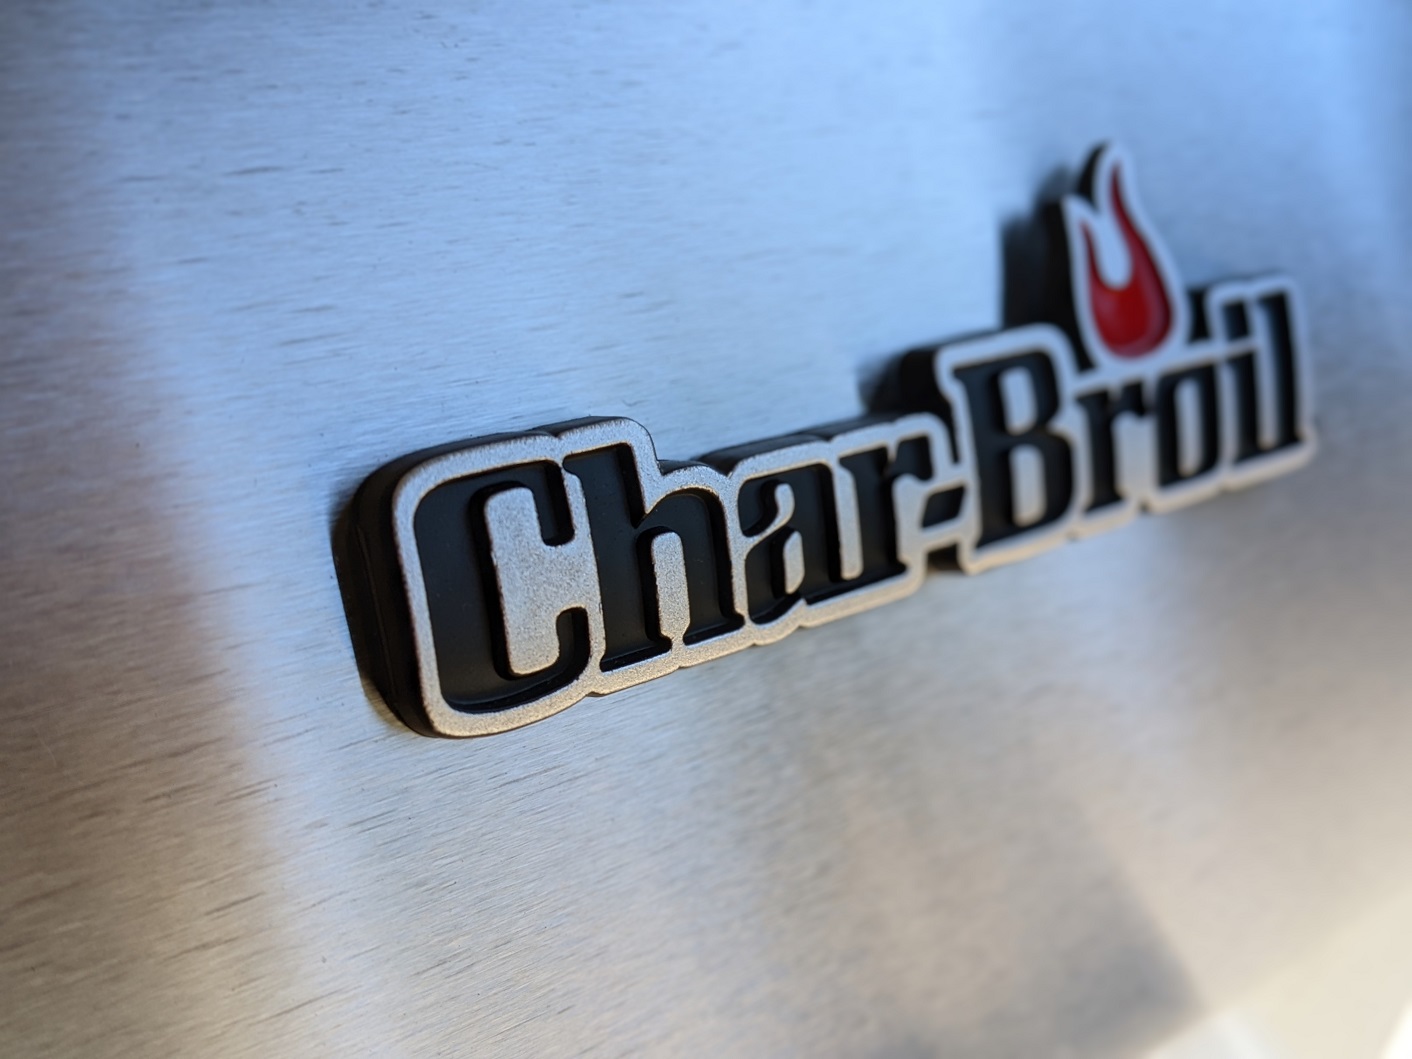 Char-Broil Edge Electric Grill